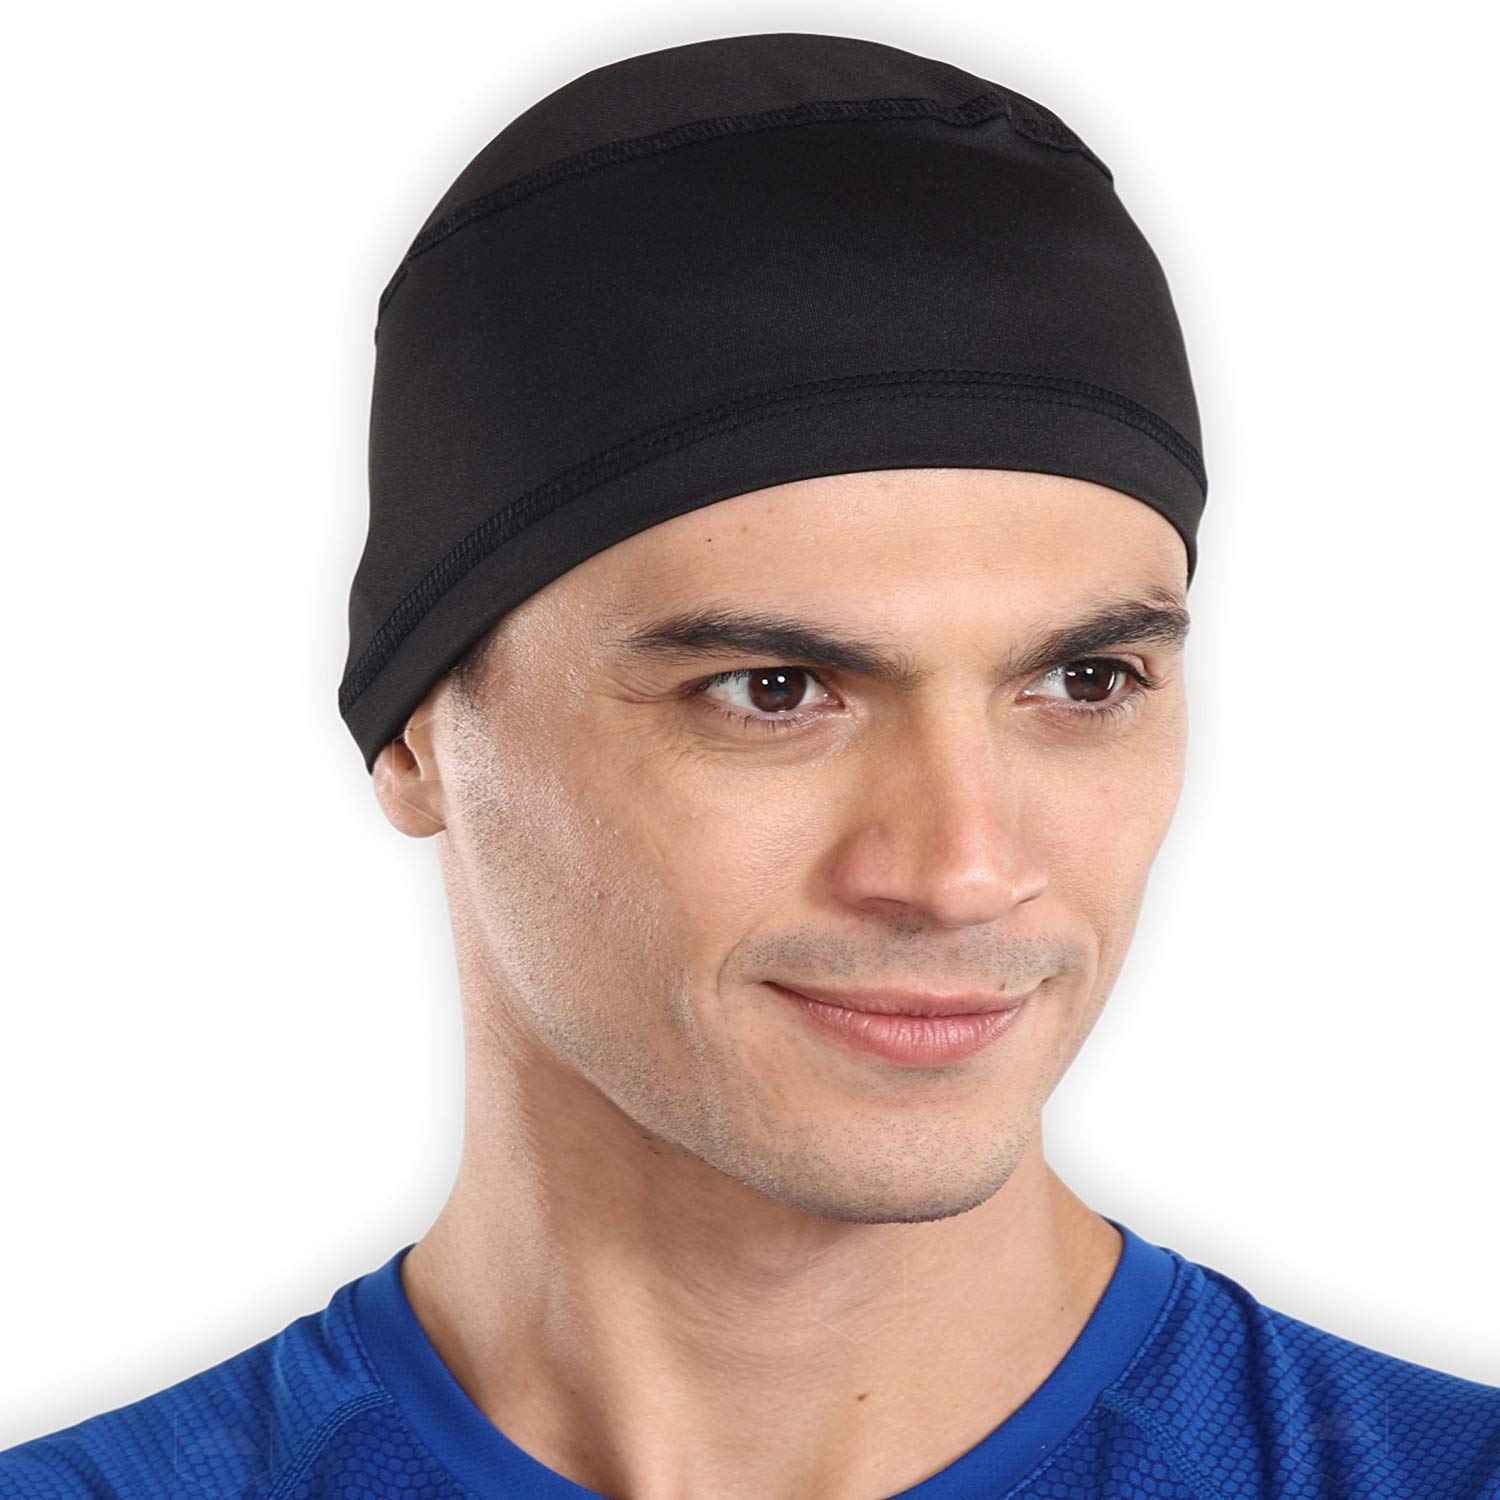 Cooling Skull Cap – Tough Outfitters